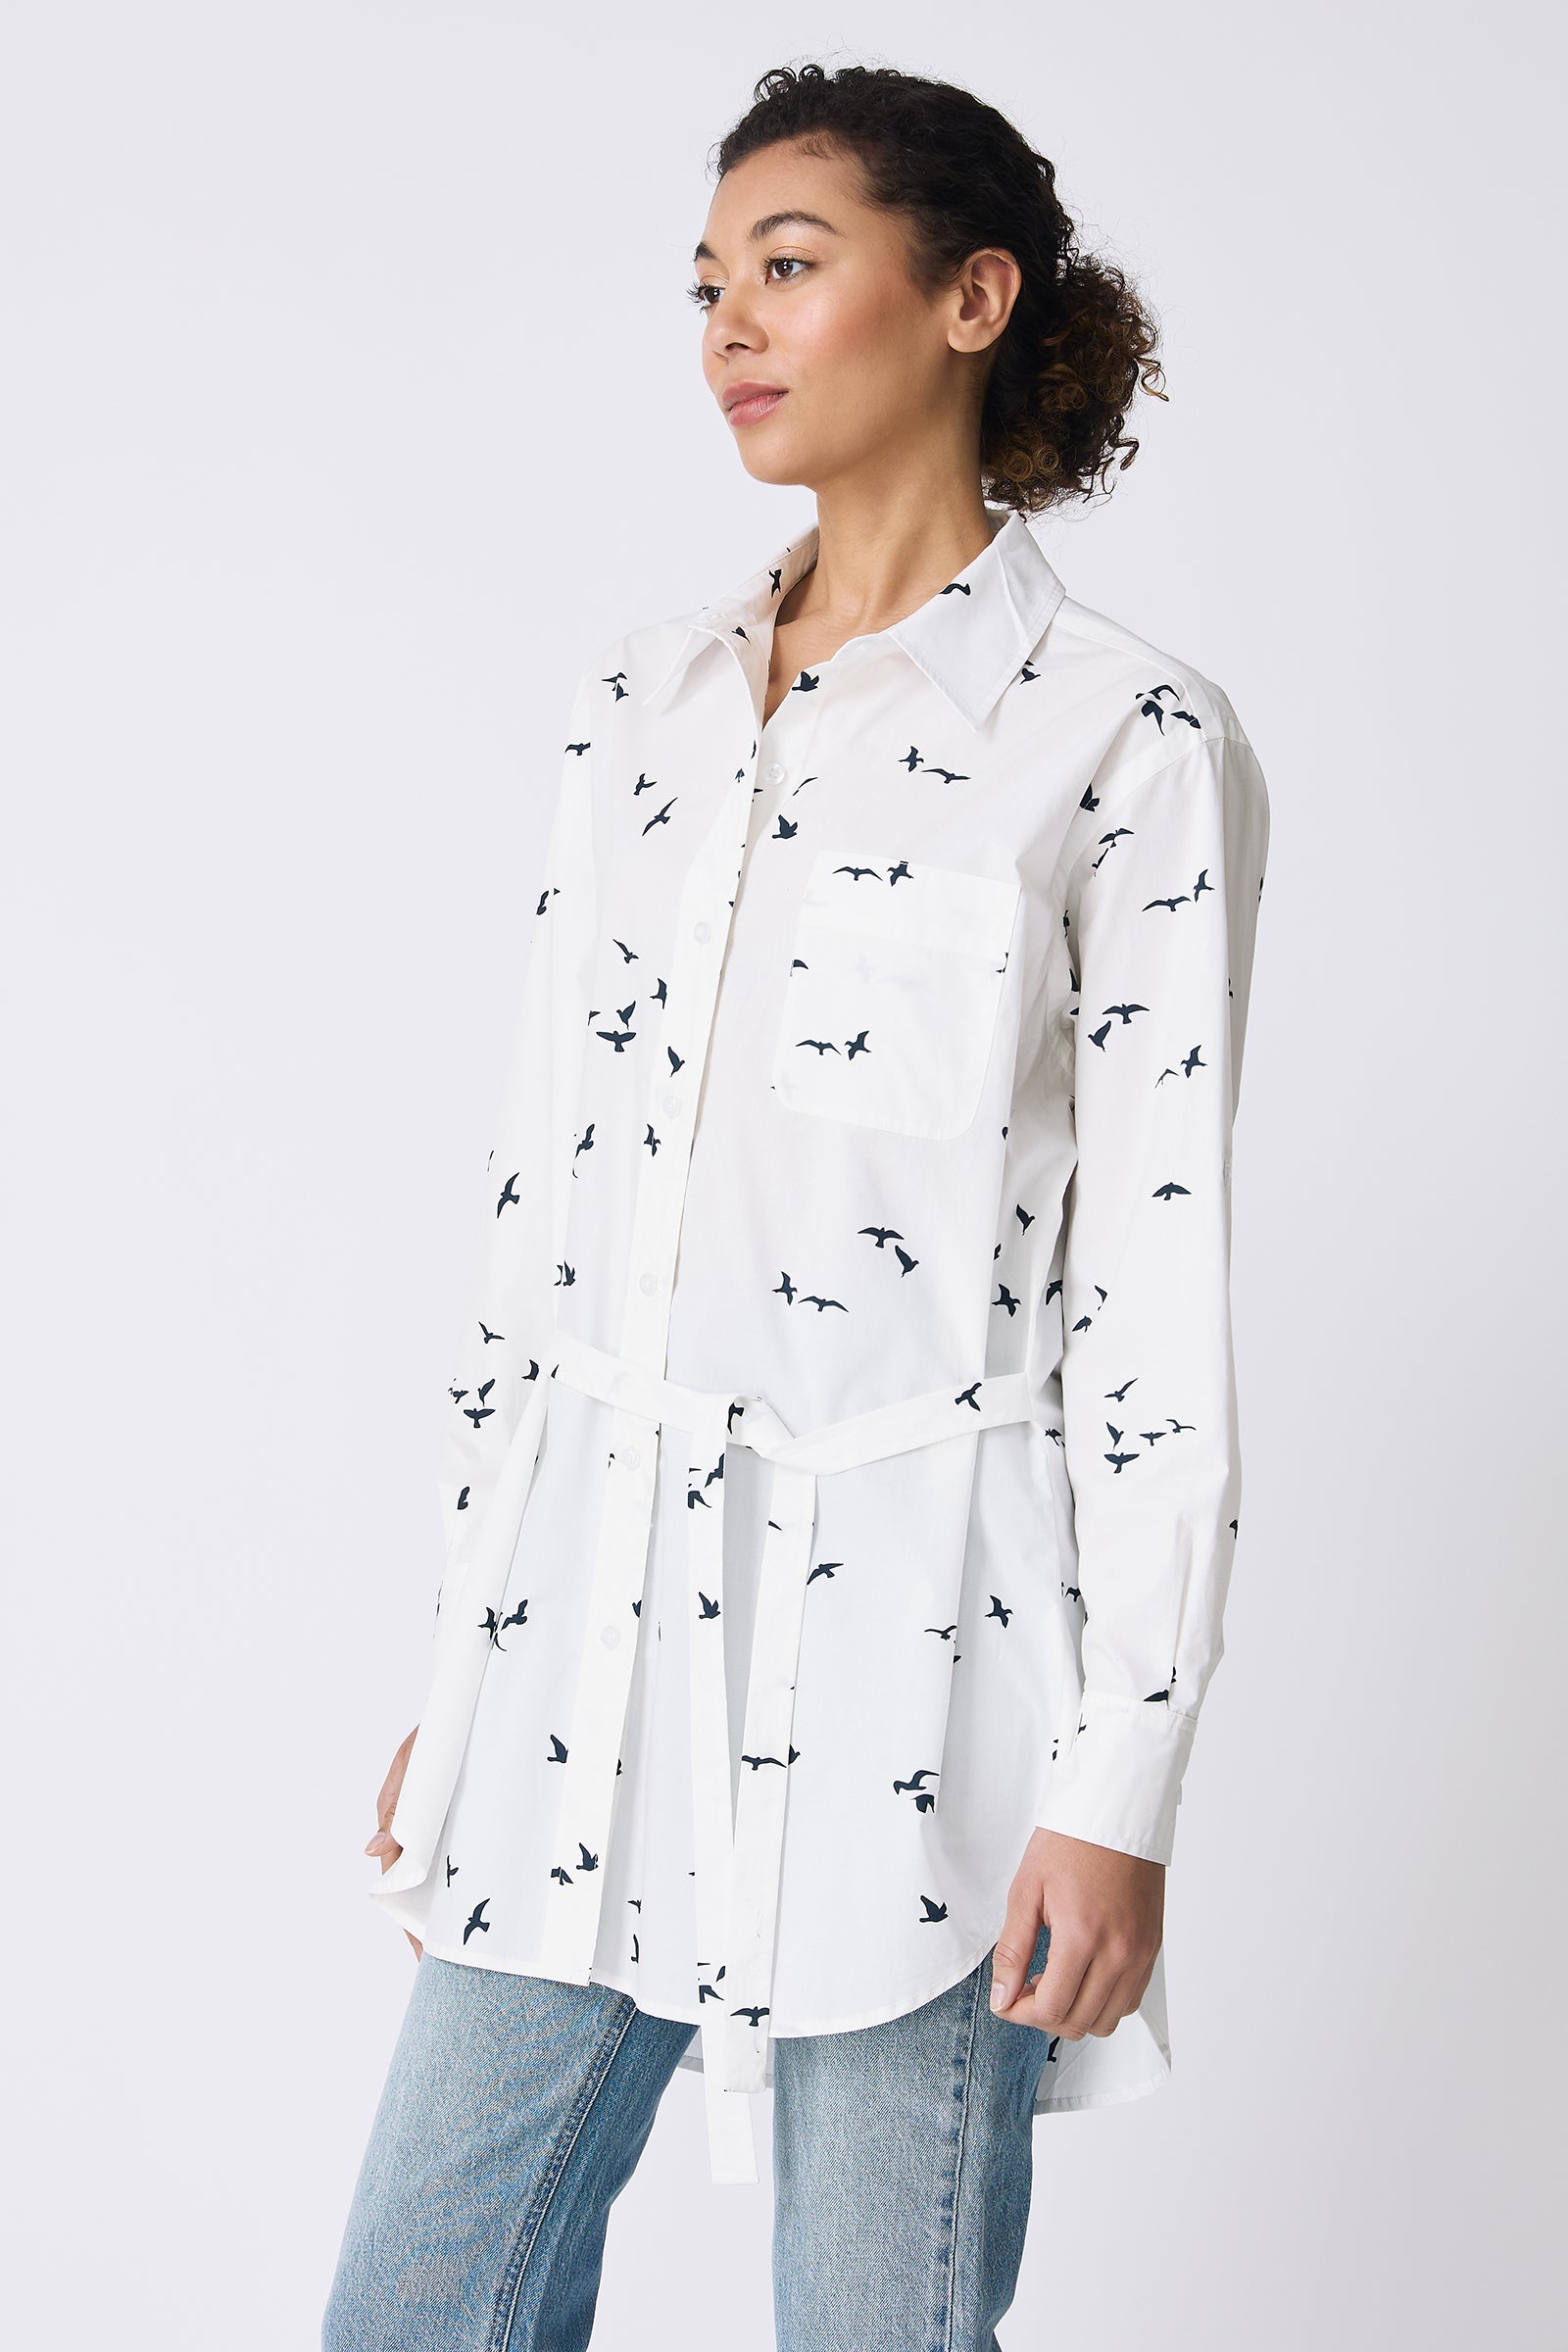 Kal Rieman Deanna Shirt in White Bird Print on model looking right front side view